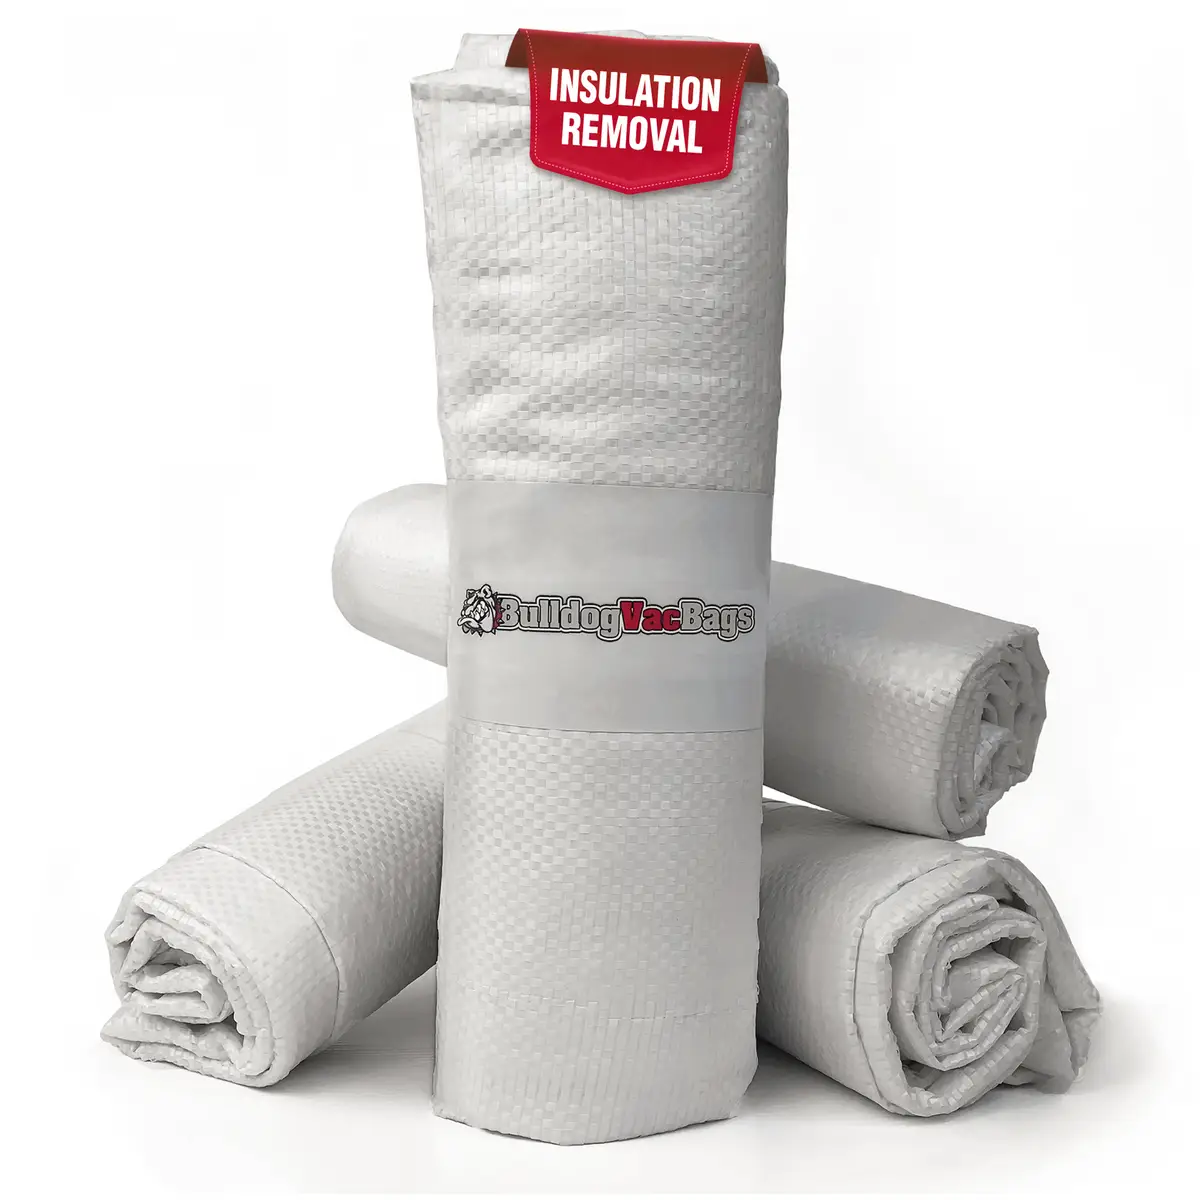 Insulation Removal Bags with a no-tear guarantee